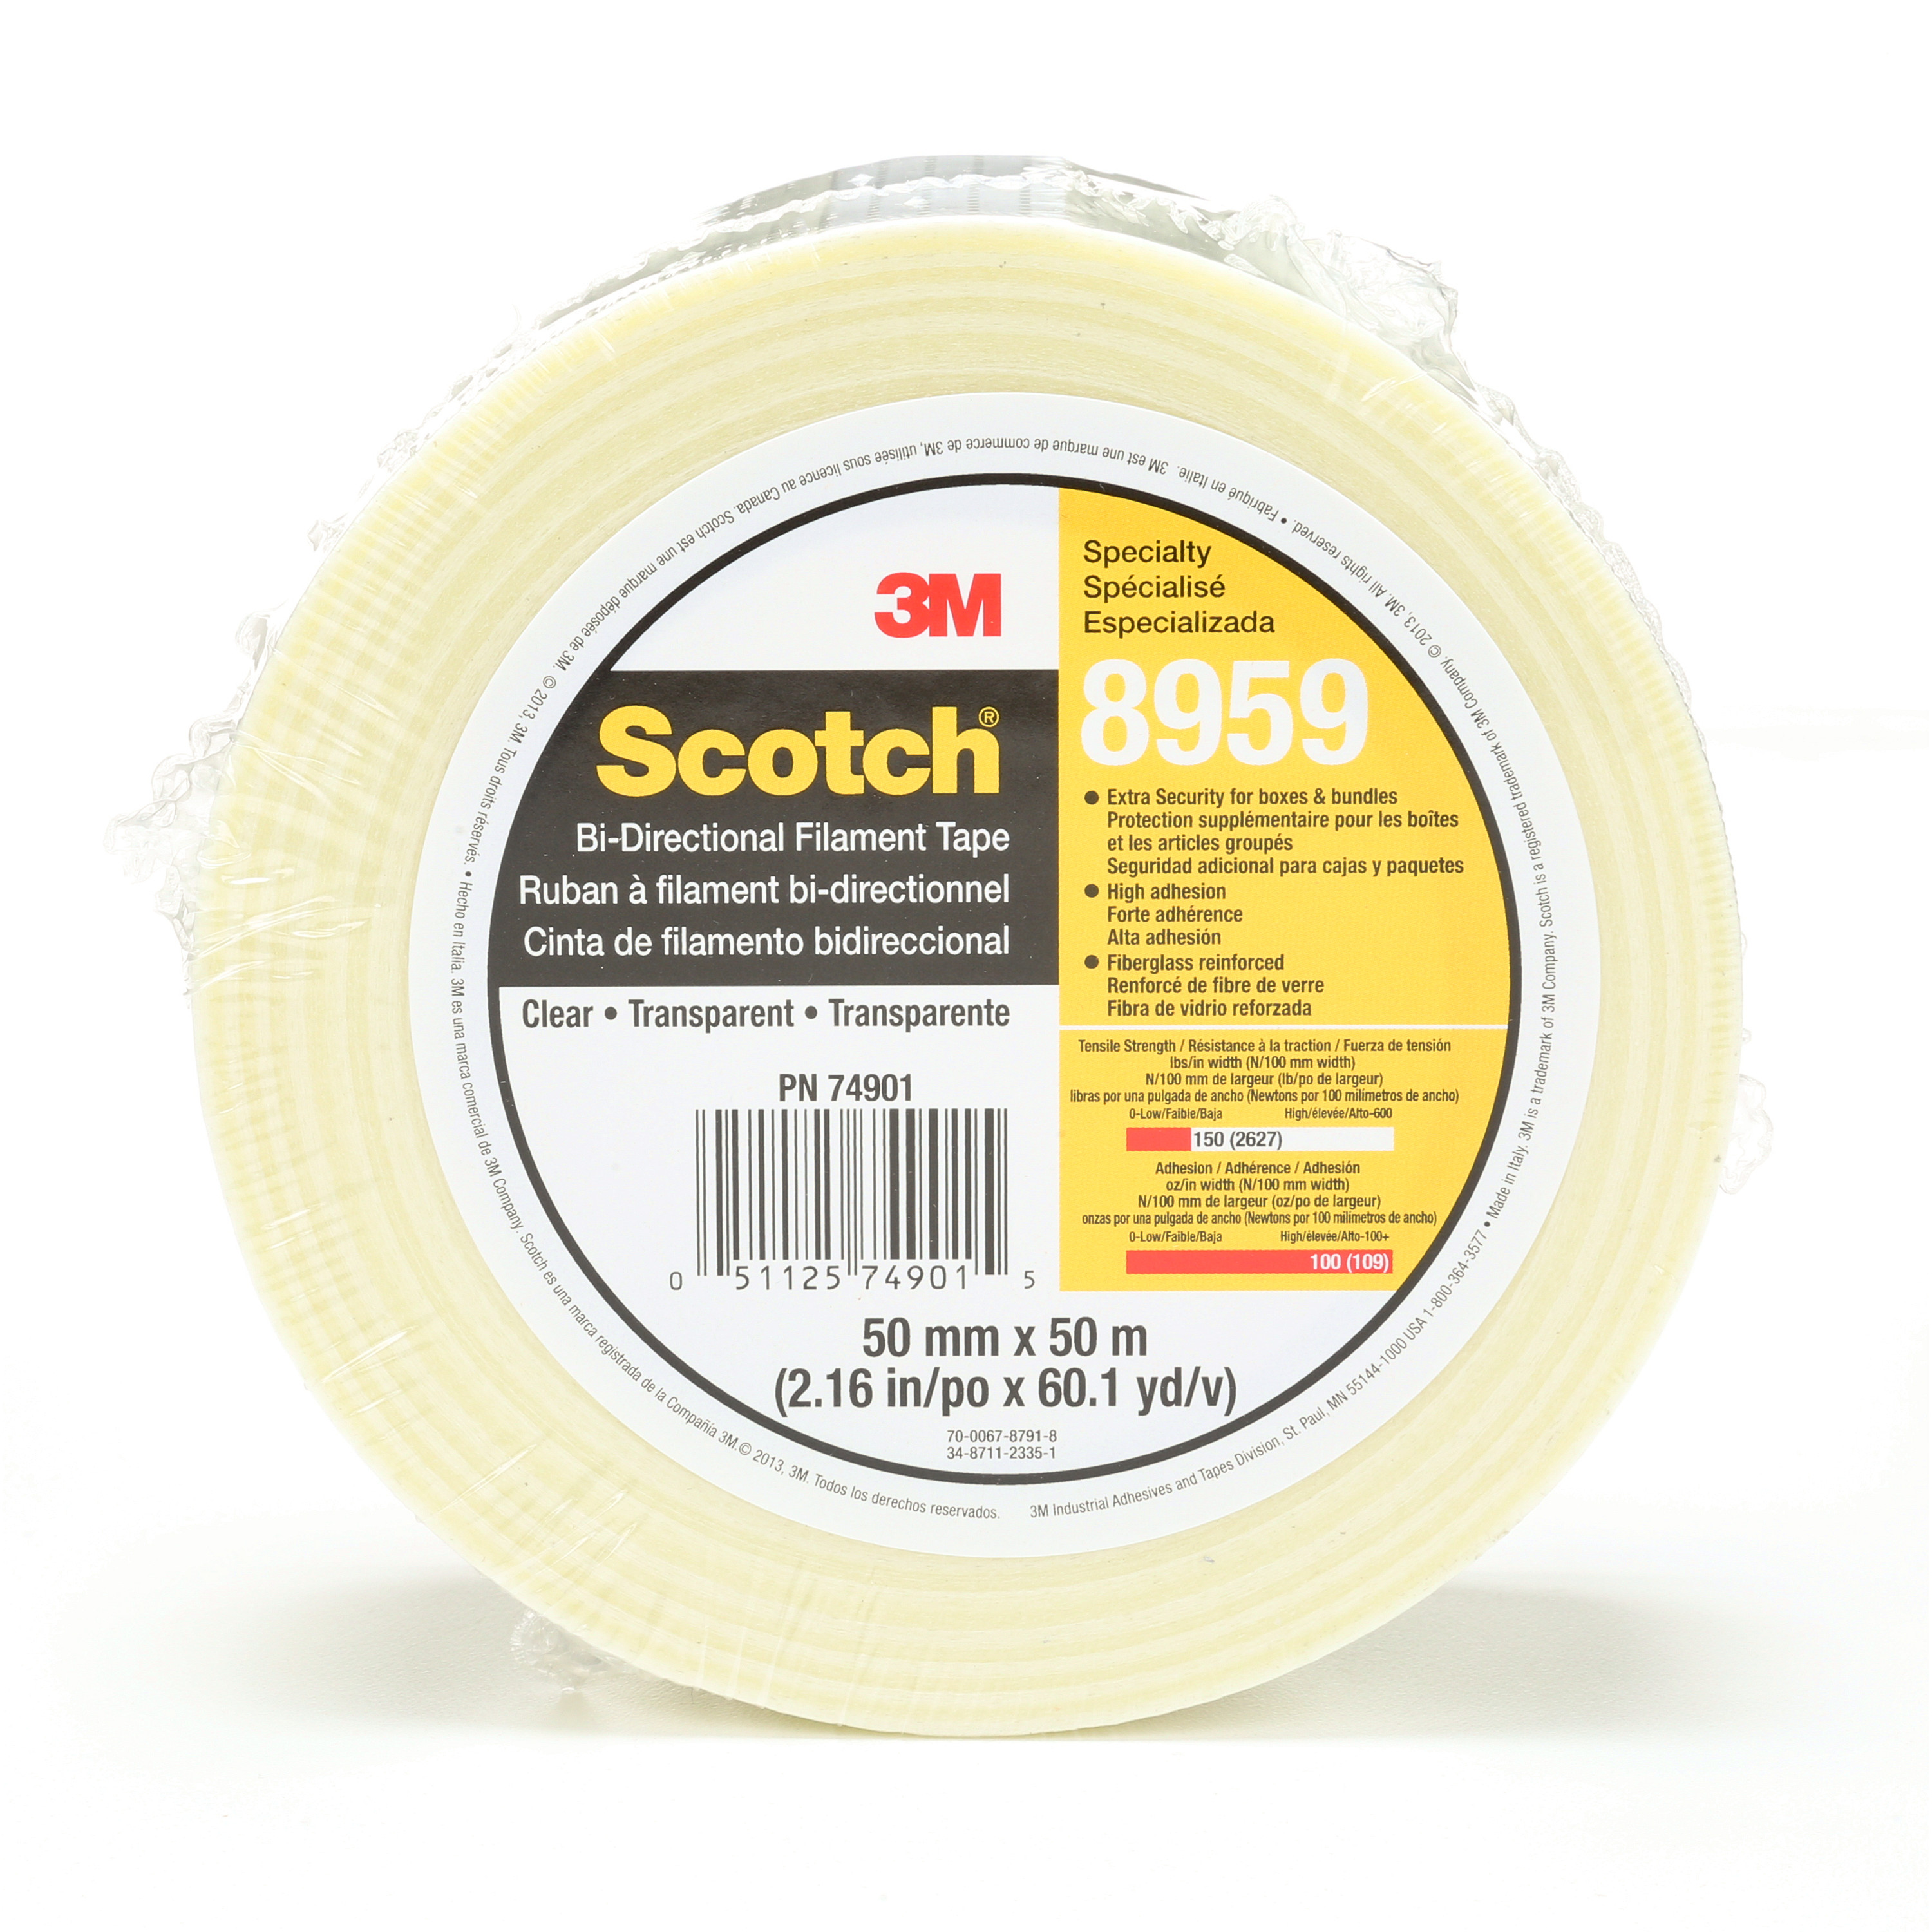 Scotch® Bi-Directional Filament Tape 8959, Clear, 50 mm x 50 m, 5.7 mil,
18 rolls/case, Individually Wrapped Conveniently Packaged